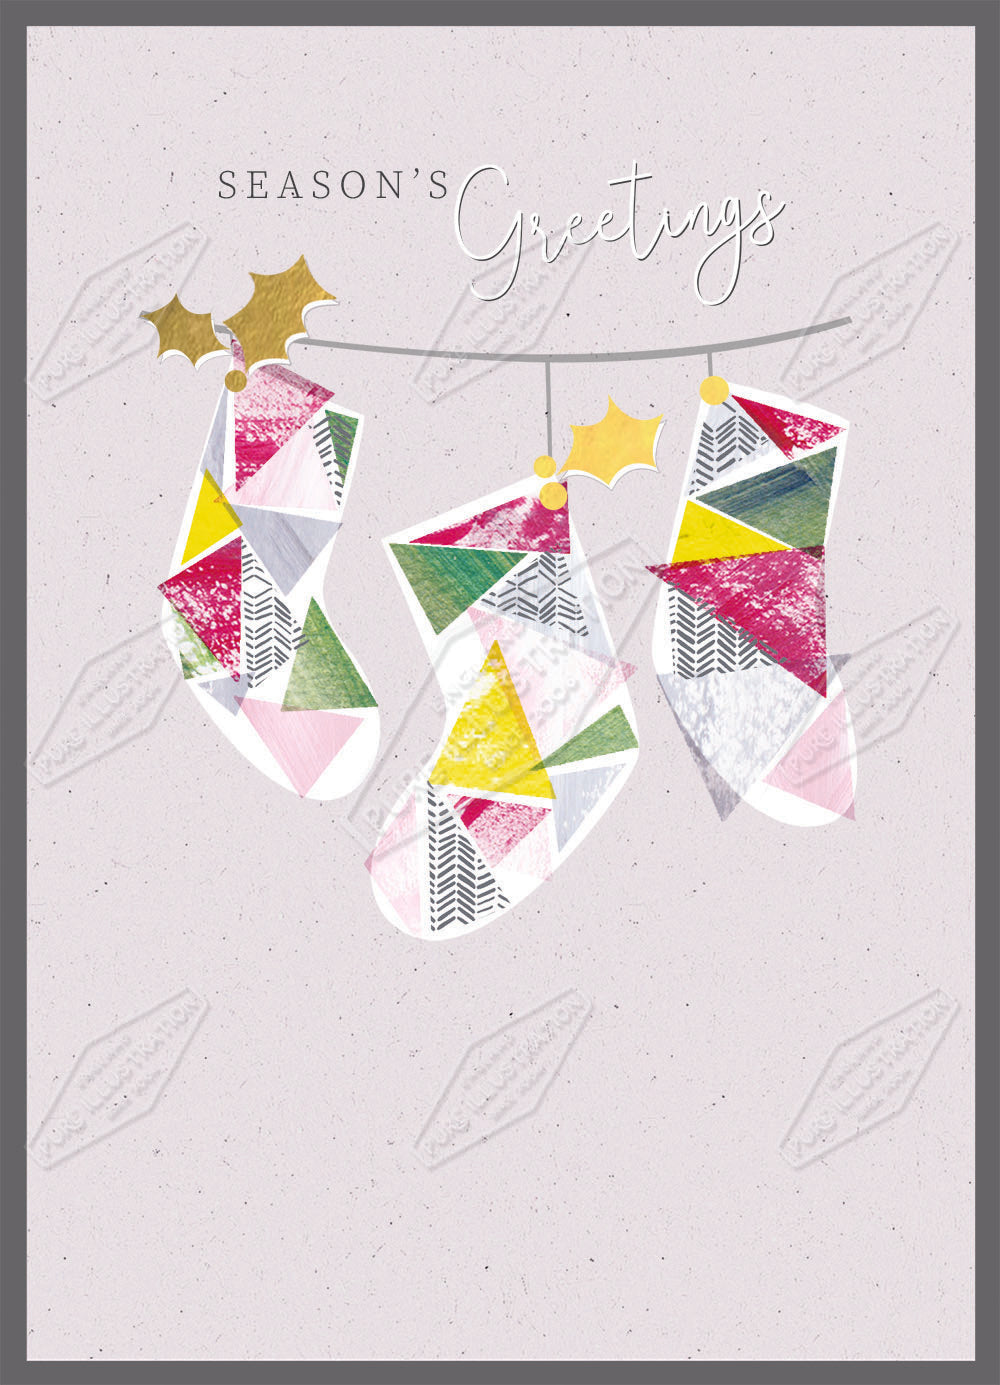 00030187SLA- Sarah Lake is represented by Pure Art Licensing Agency - Christmas Greeting Card Design